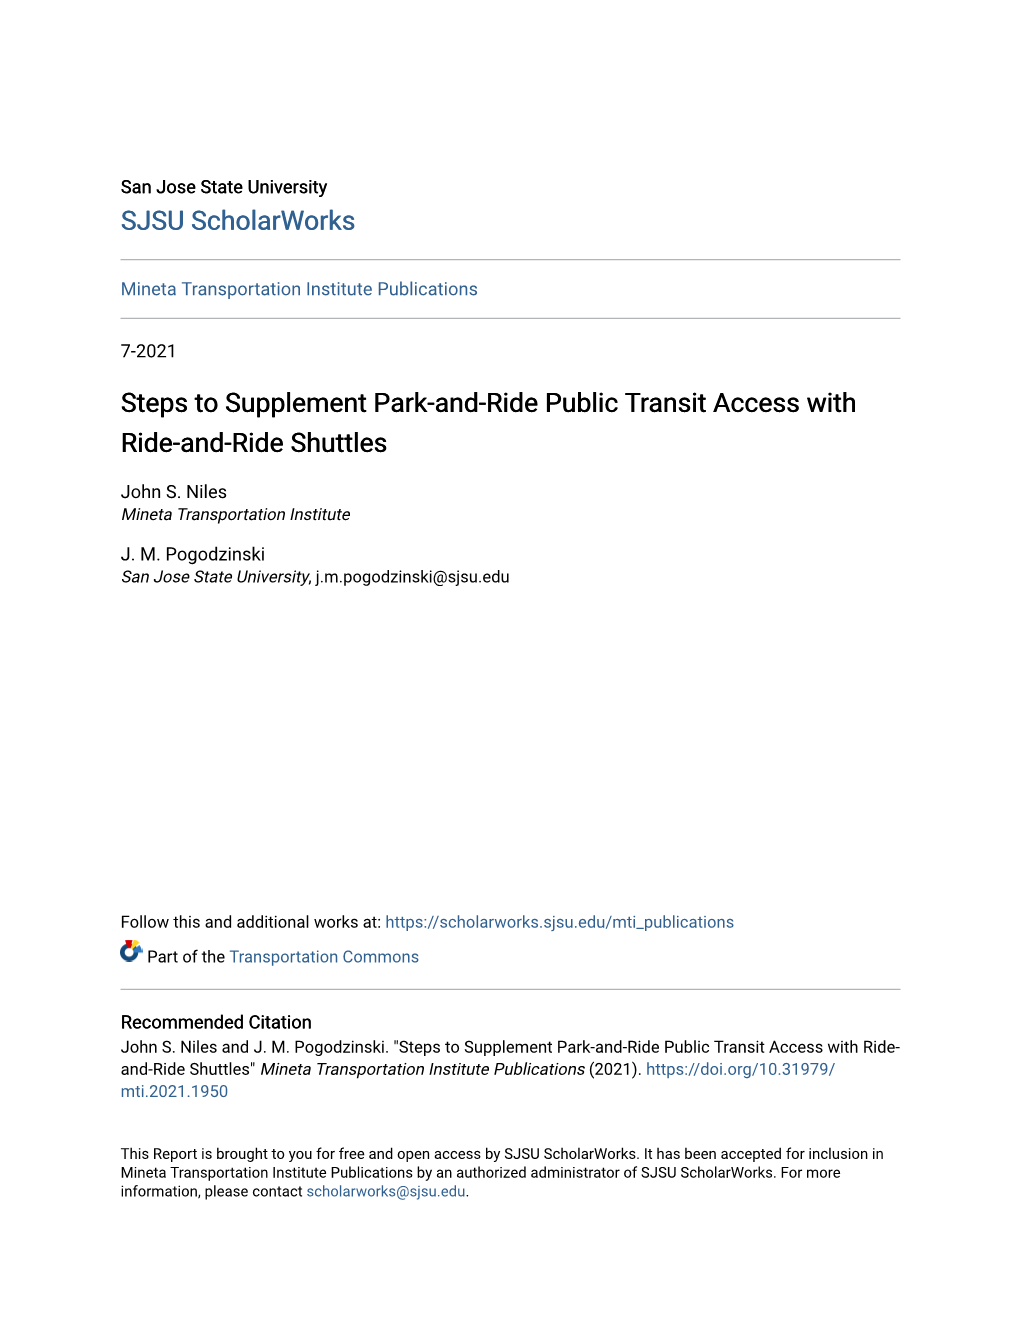 Steps to Supplement Park-And-Ride Public Transit Access with Ride-And-Ride Shuttles